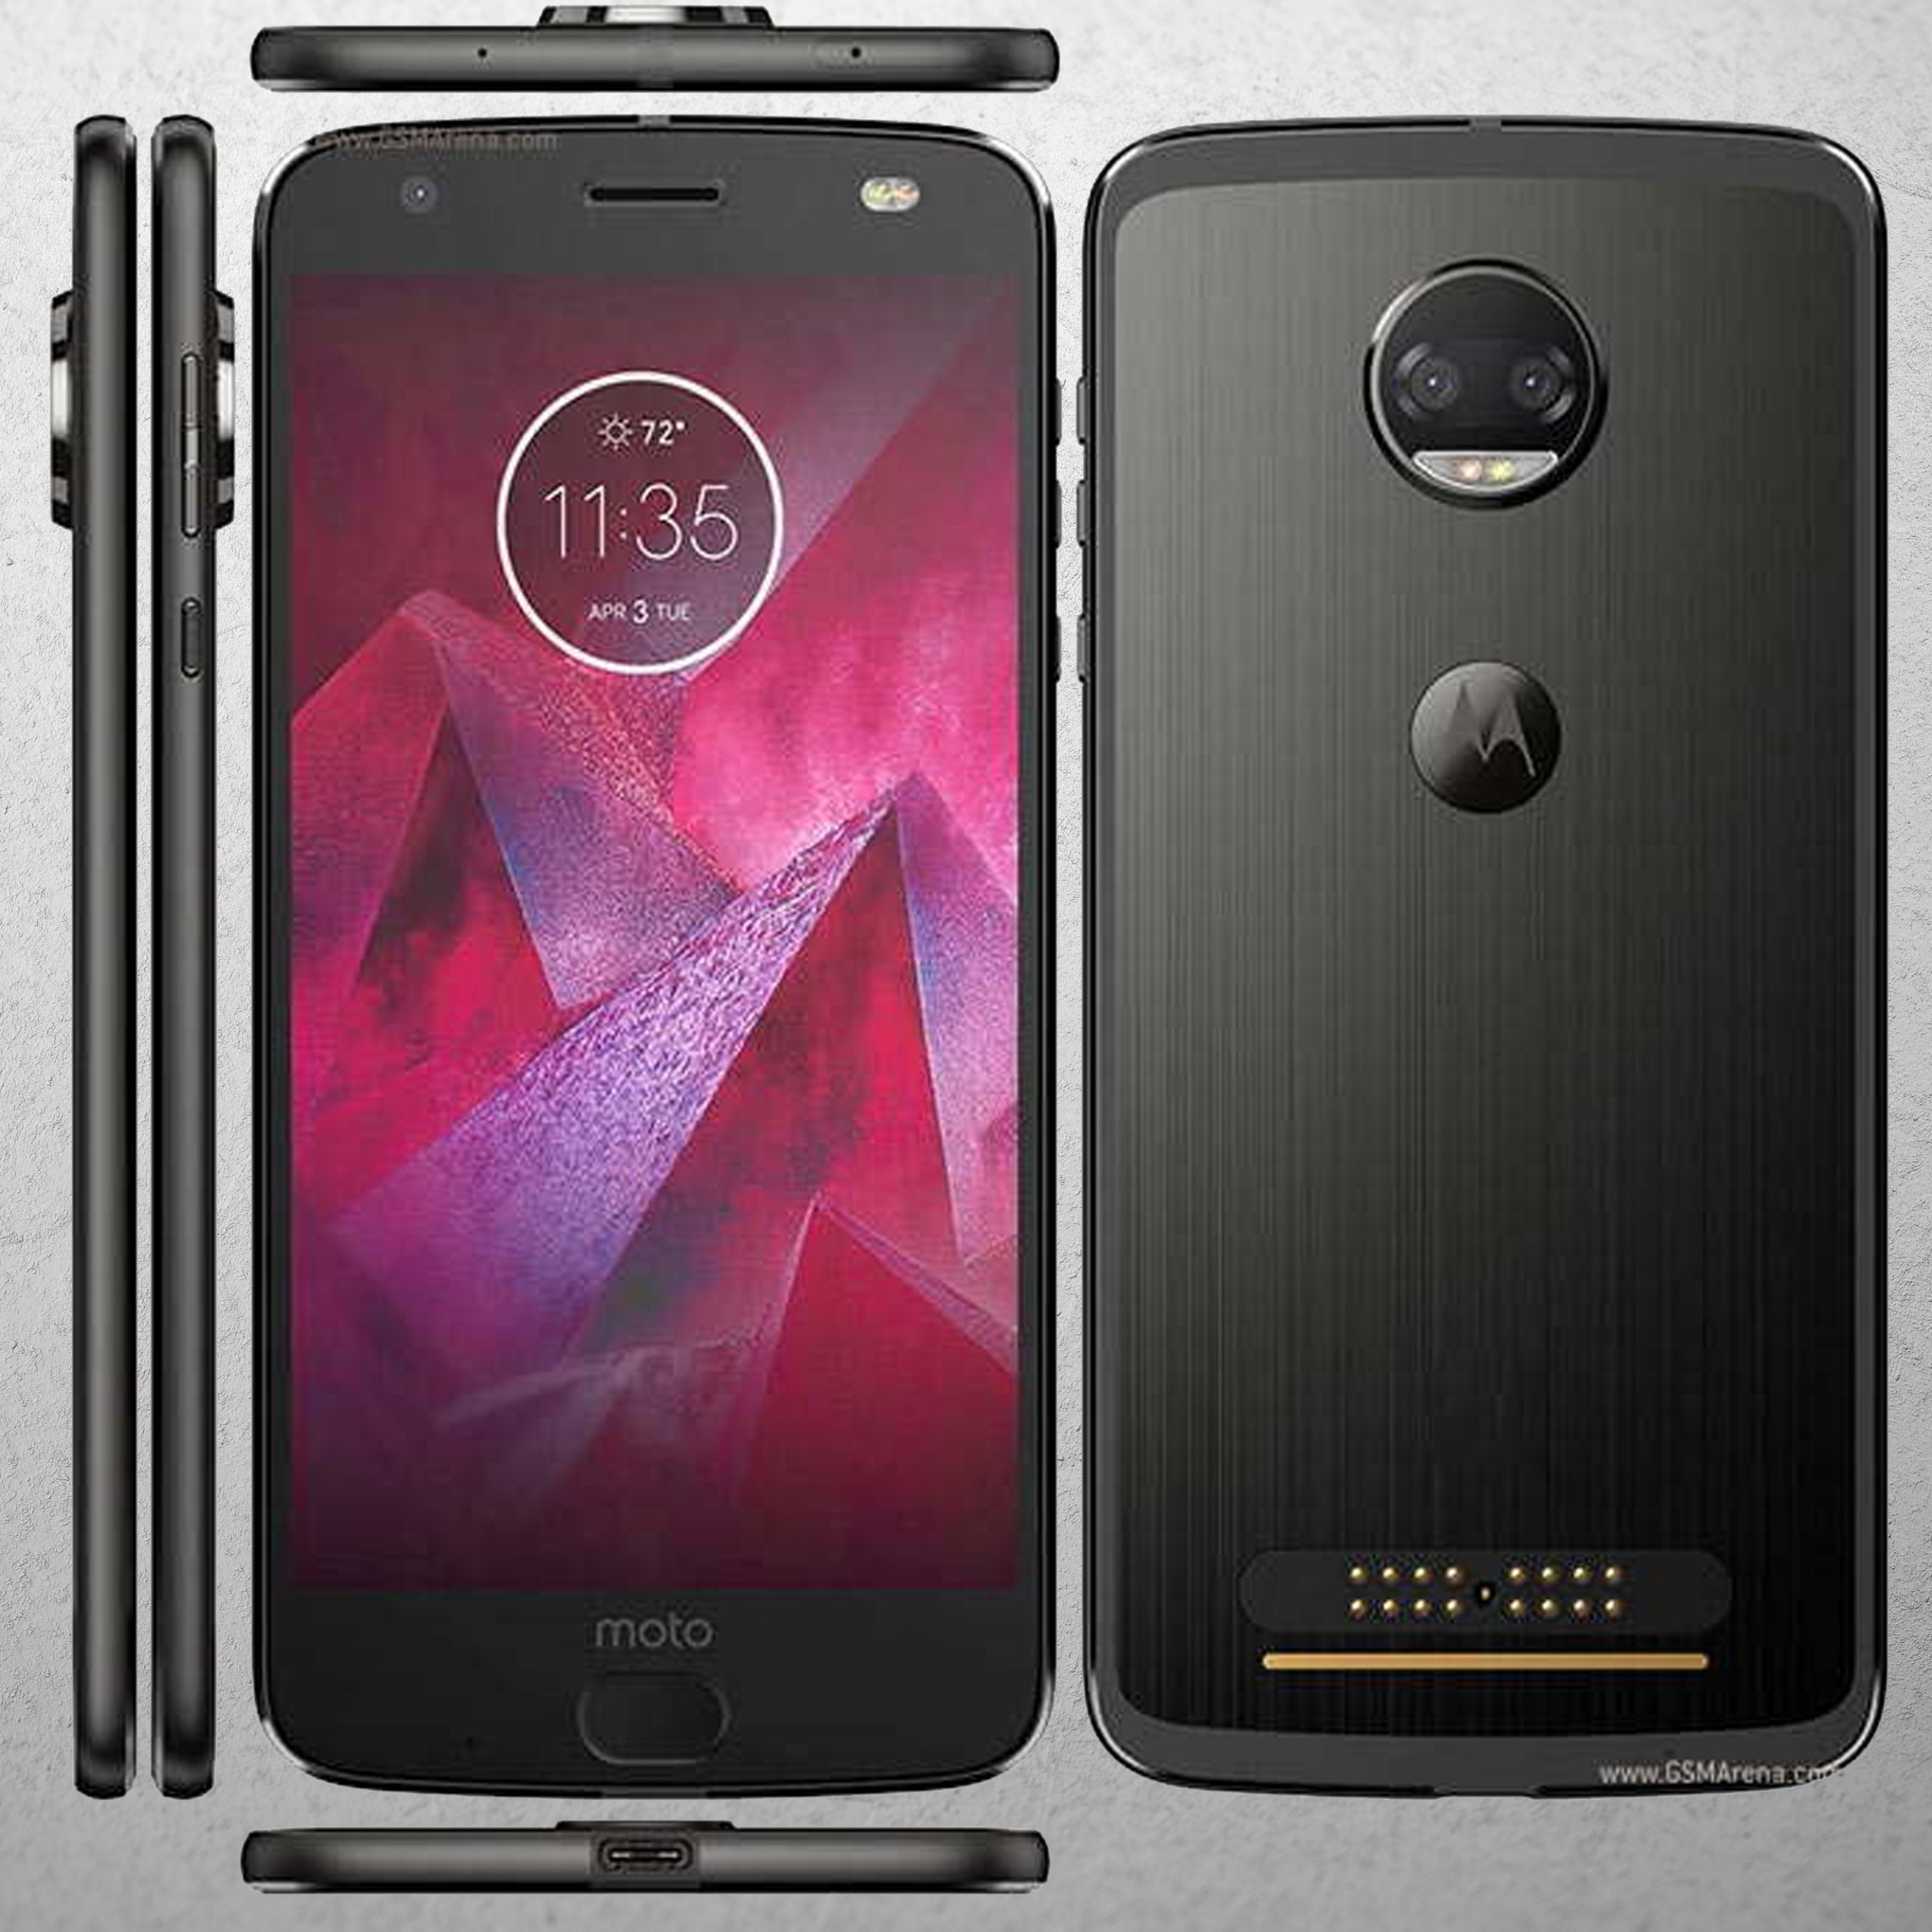 The Motorola Moto Z2 Force and Z2 Force Play, The cutting-edge smartphones, showcased from both front and back angles.